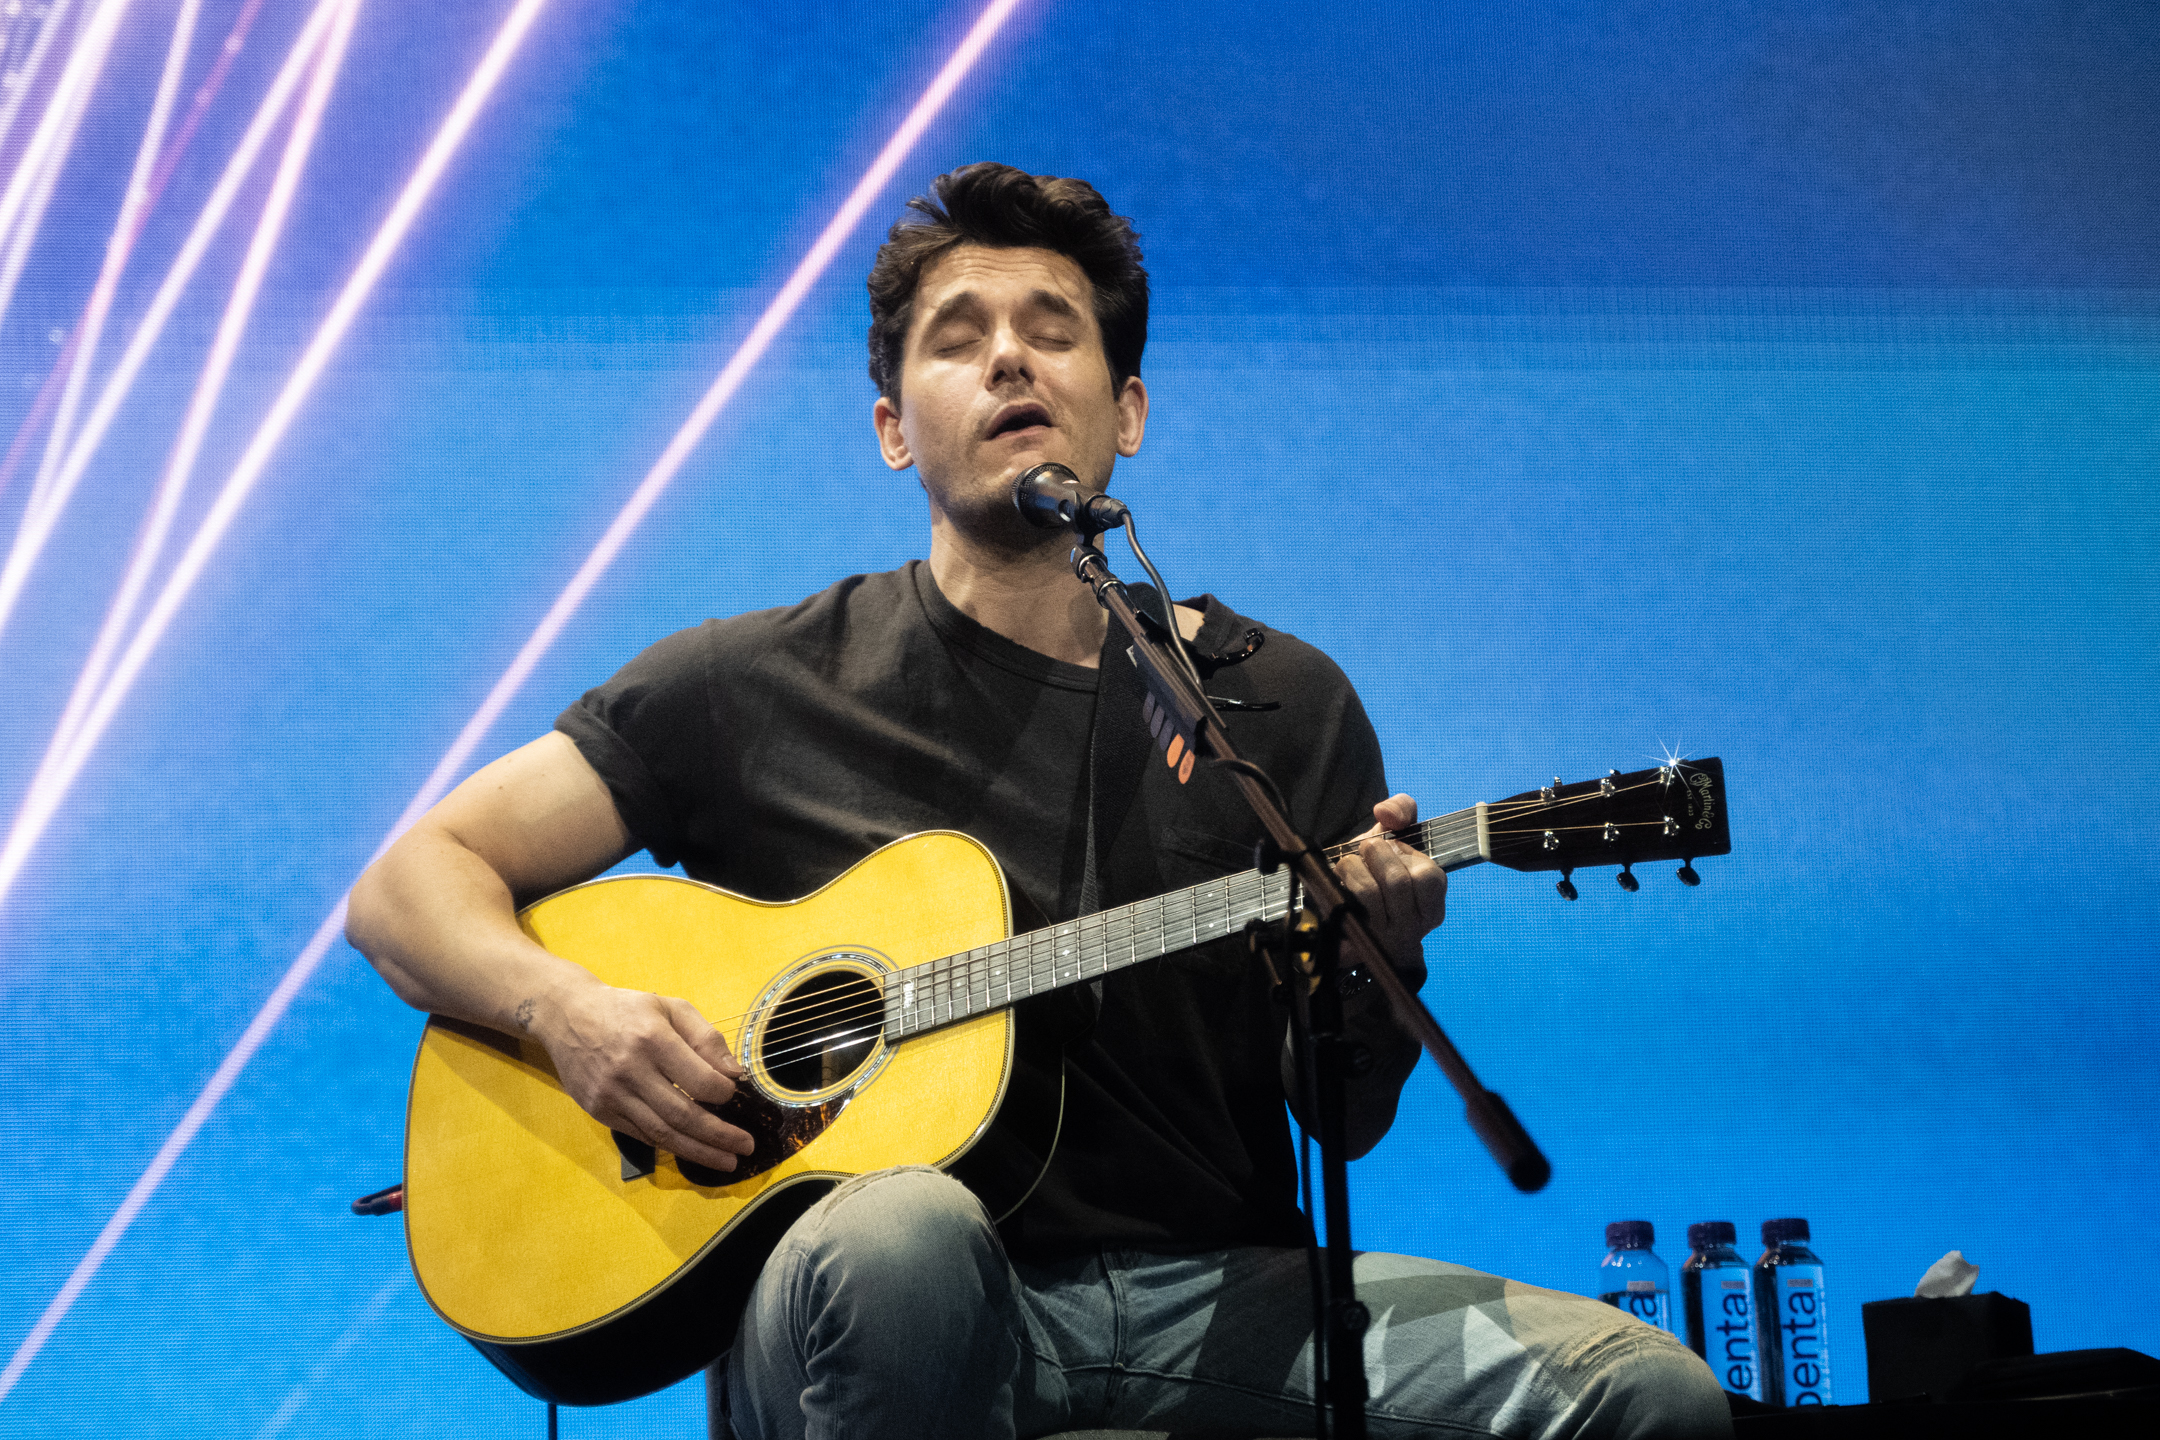 John Mayer kicks off his Solo tour at the Prudential Center in Newark, NJ on Saturday, March 11, 2023.